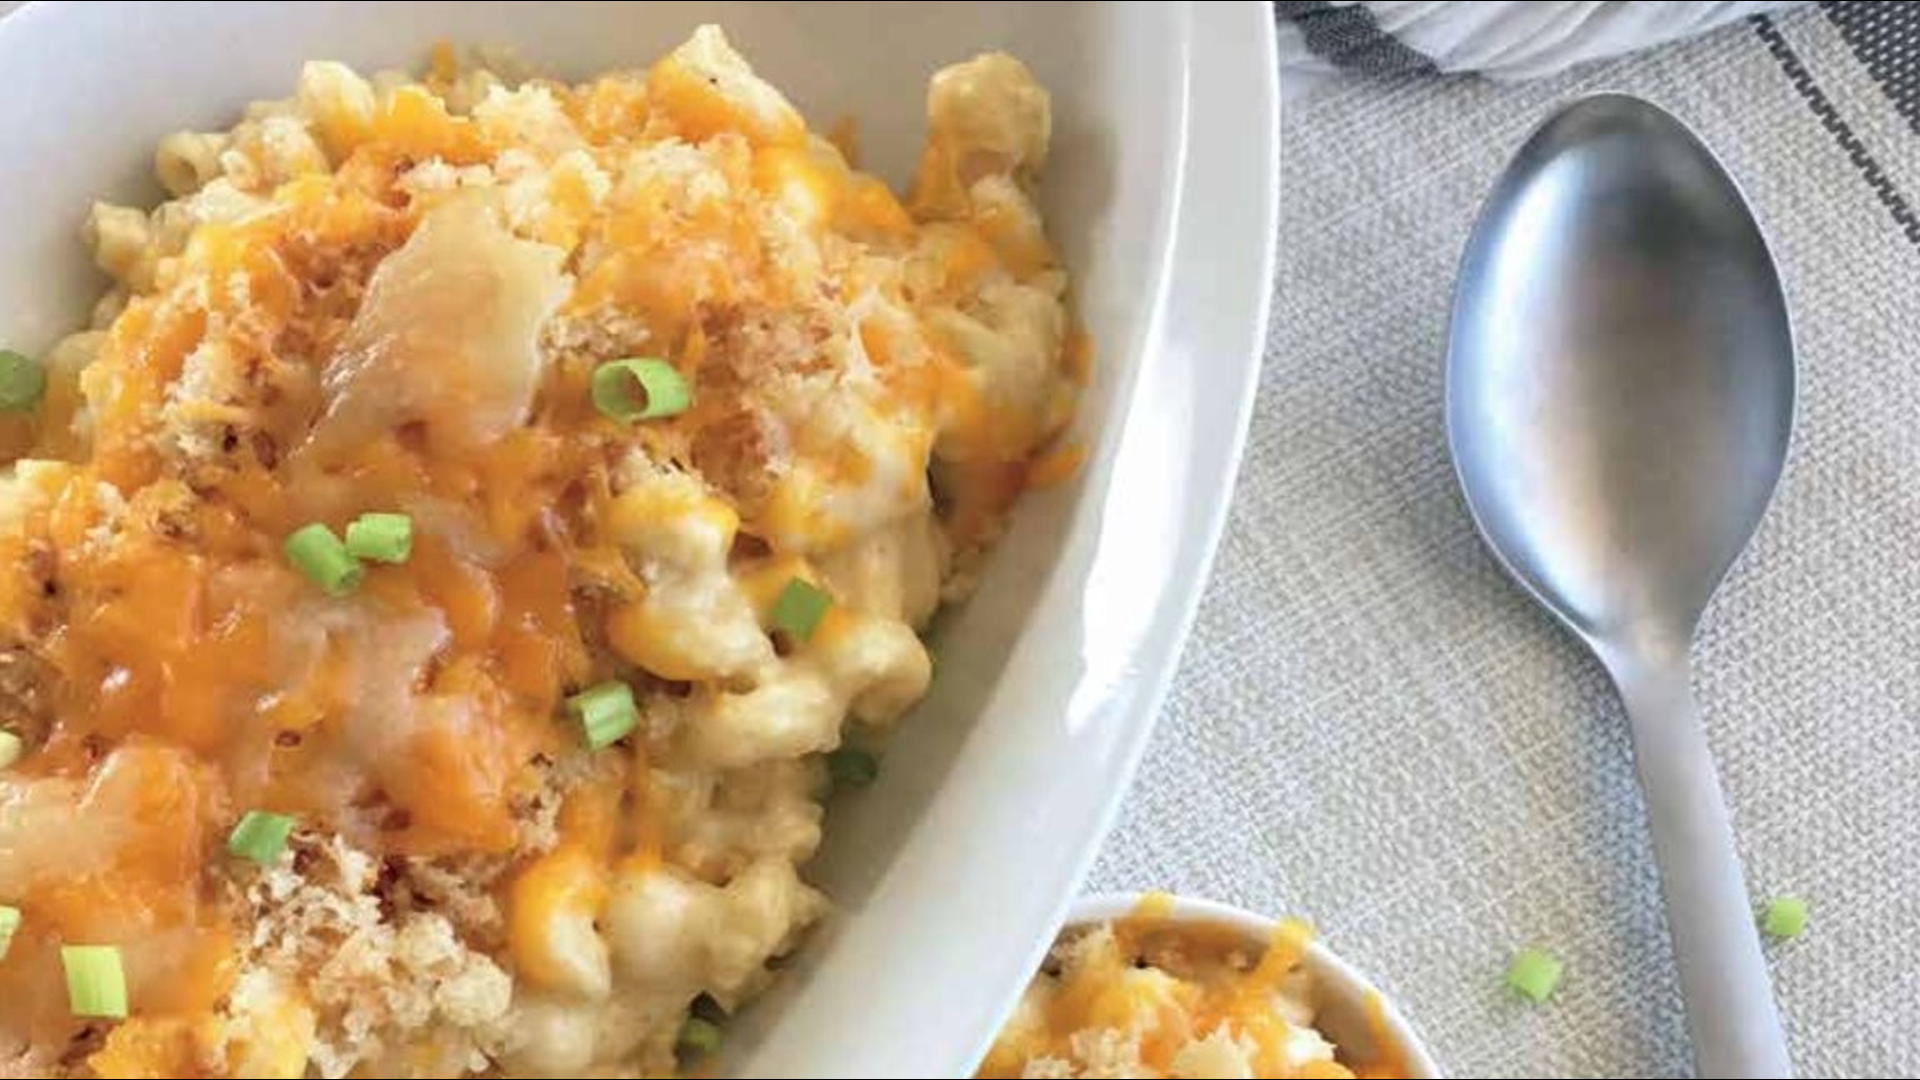 Chef Gina Ferwerda, author of Meals from the Mitten, shares a recipe for a cheesy comfort food combo.